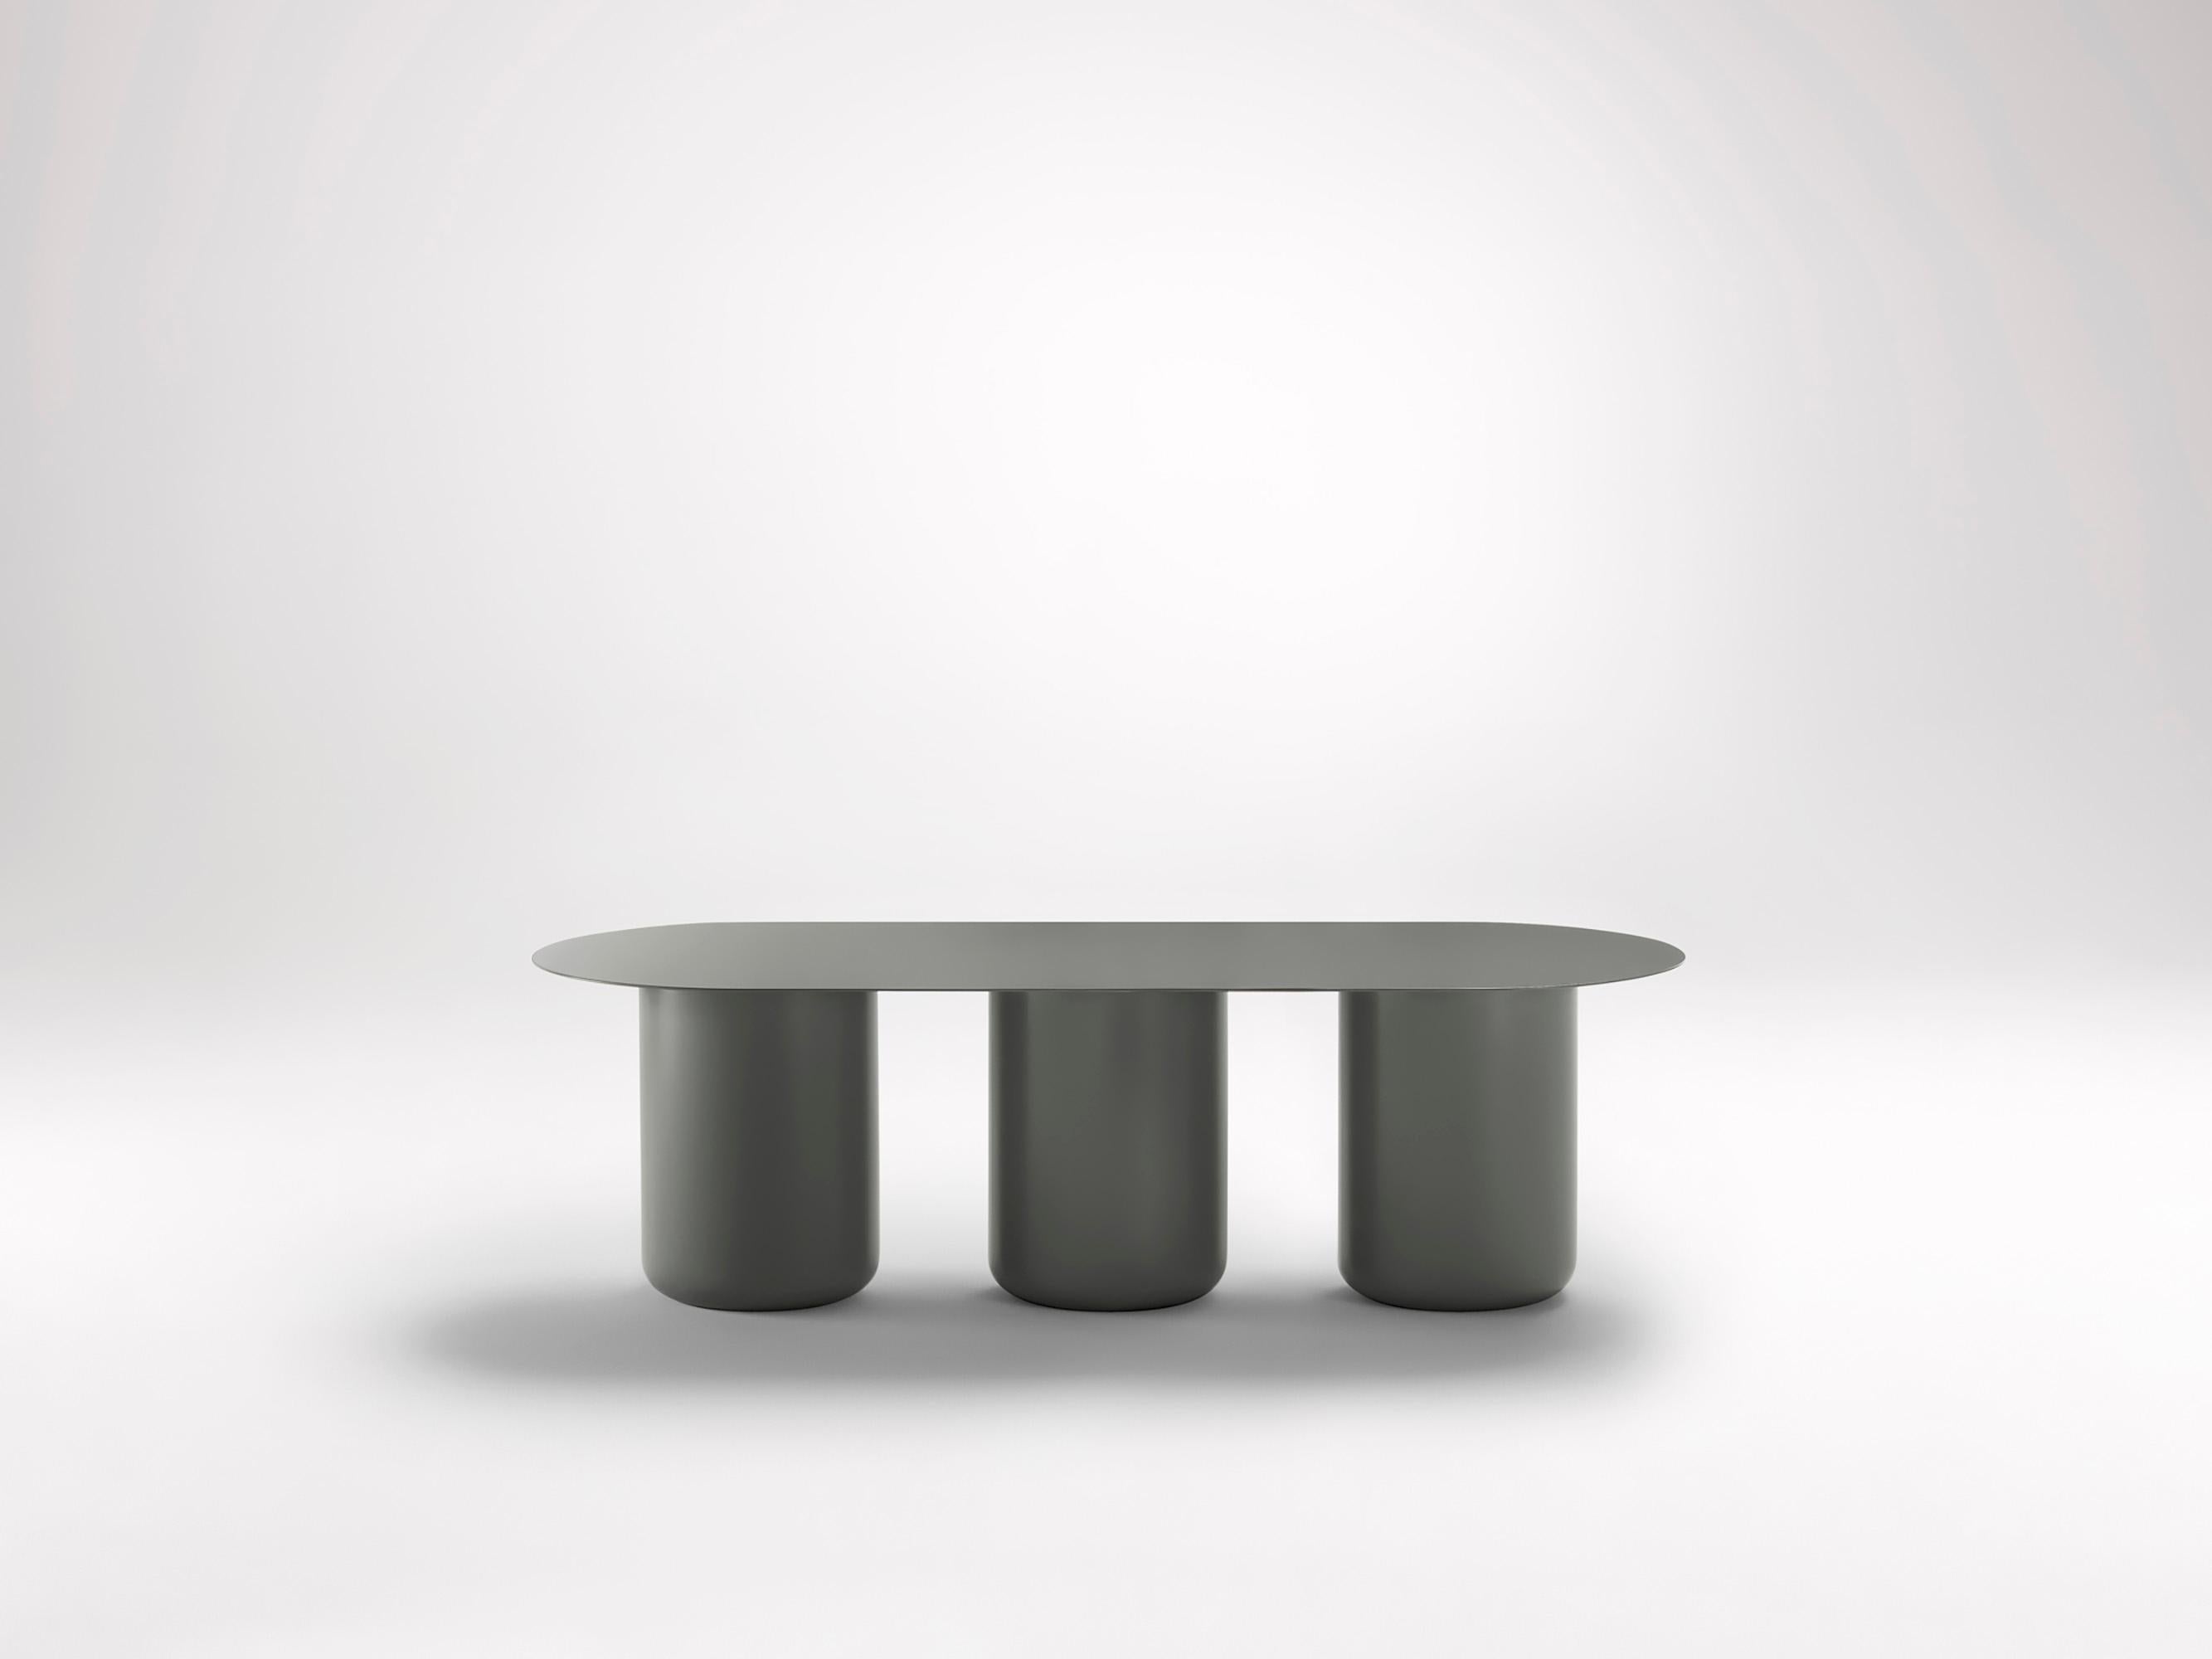 Woodland Grey Table 03 by Coco Flip
Dimensions: D 48 / 122 x H 32 / 36 / 40 / 42 cm
Materials: Mild steel, powder-coated with zinc undercoat. 
Weight: 30 kg

Coco Flip is a Melbourne based furniture and lighting design studio, run by us, Kate Stokes